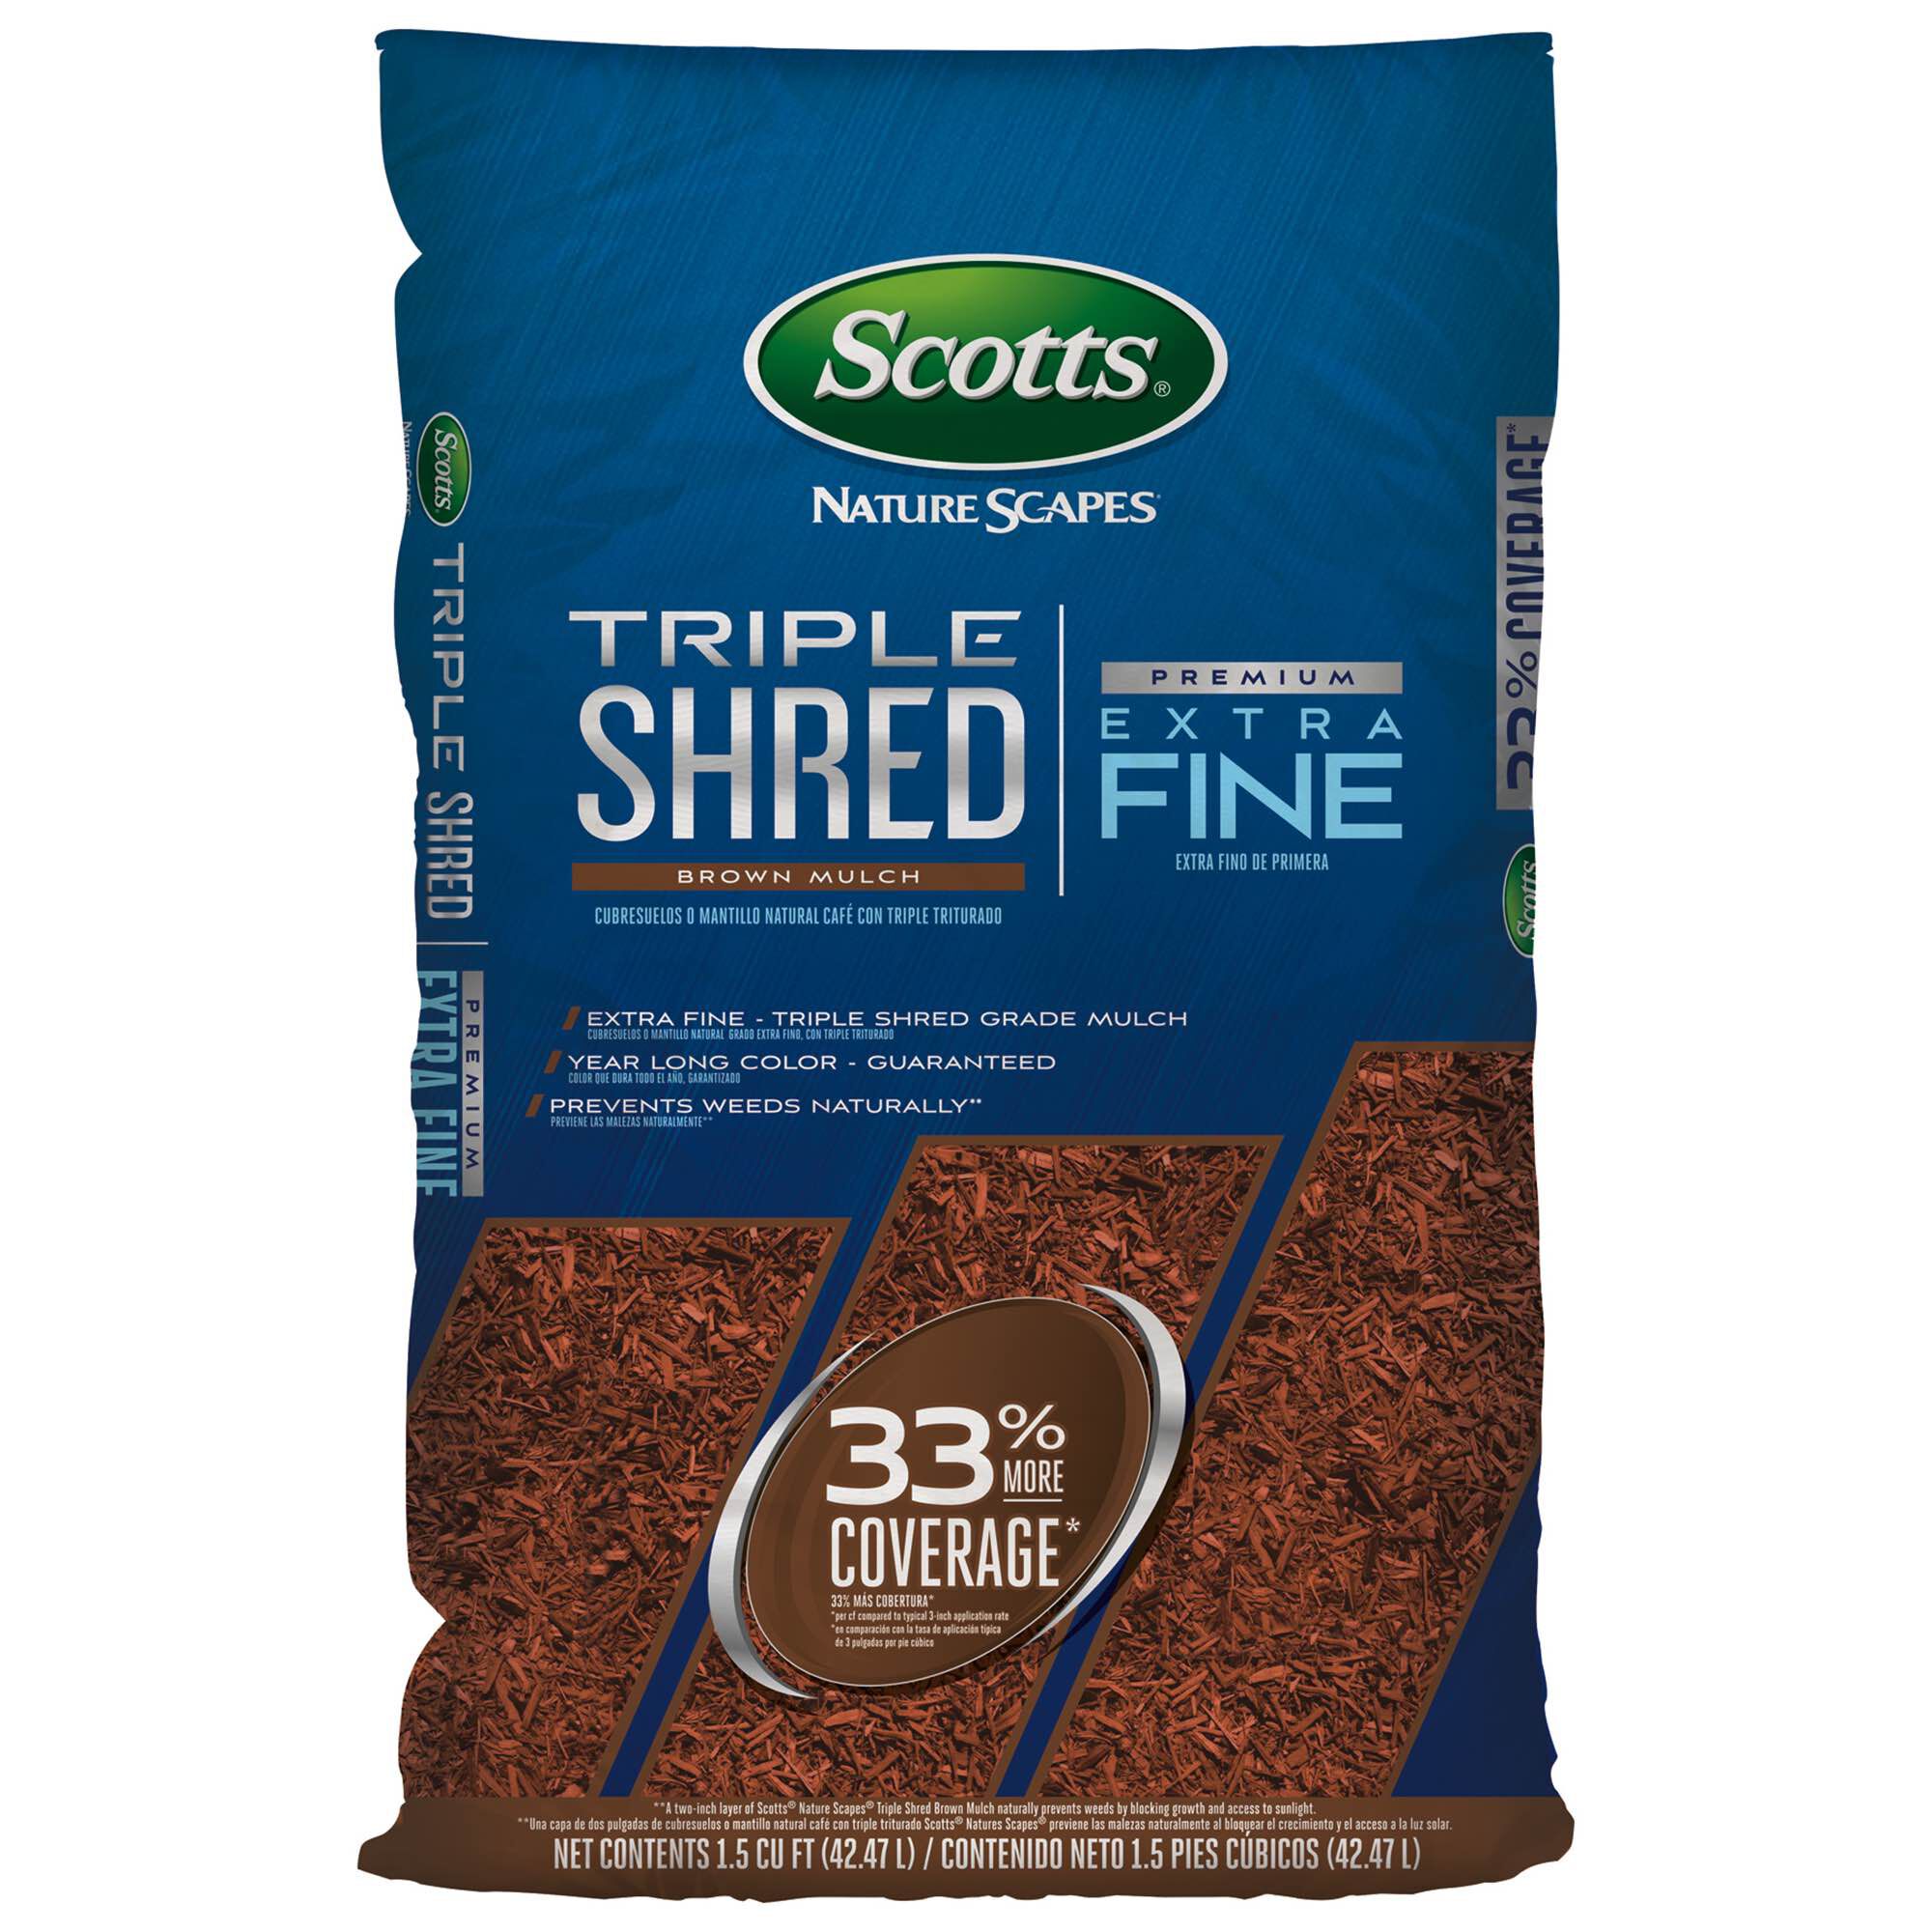 Image of Scotts triple shred brown mulch lawn